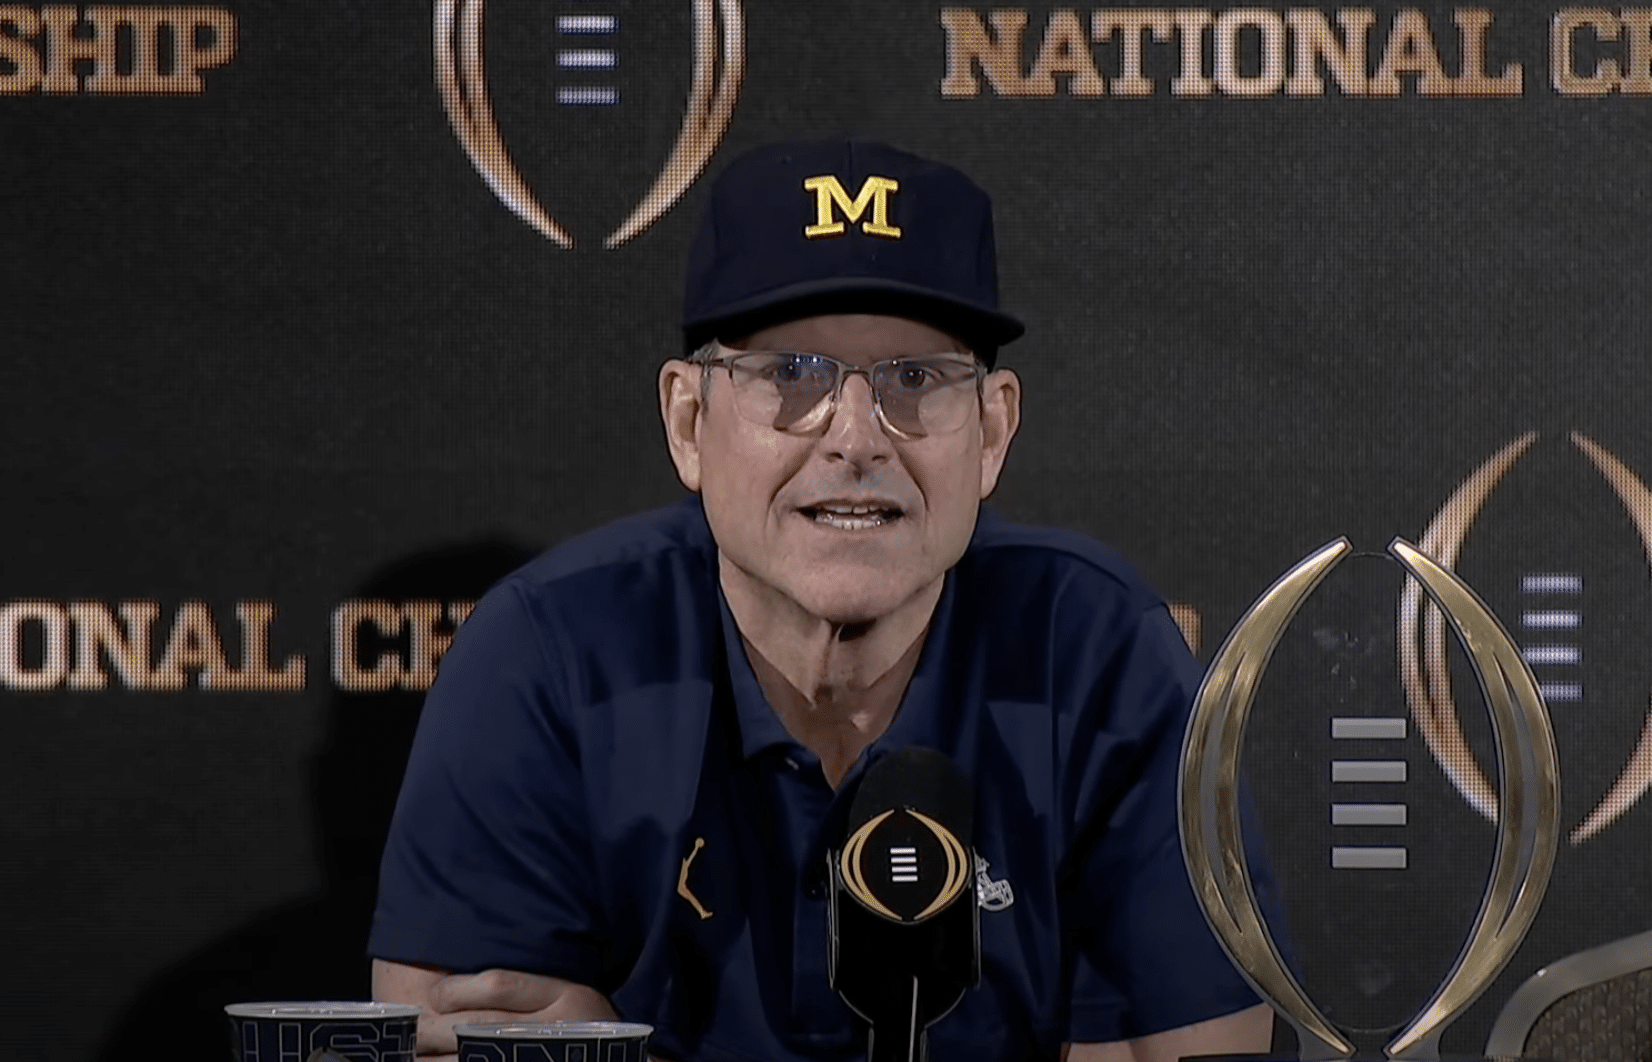 Jim Harbaugh reveals tattoo he will get NCAA President weighs in on fairness of Michigan